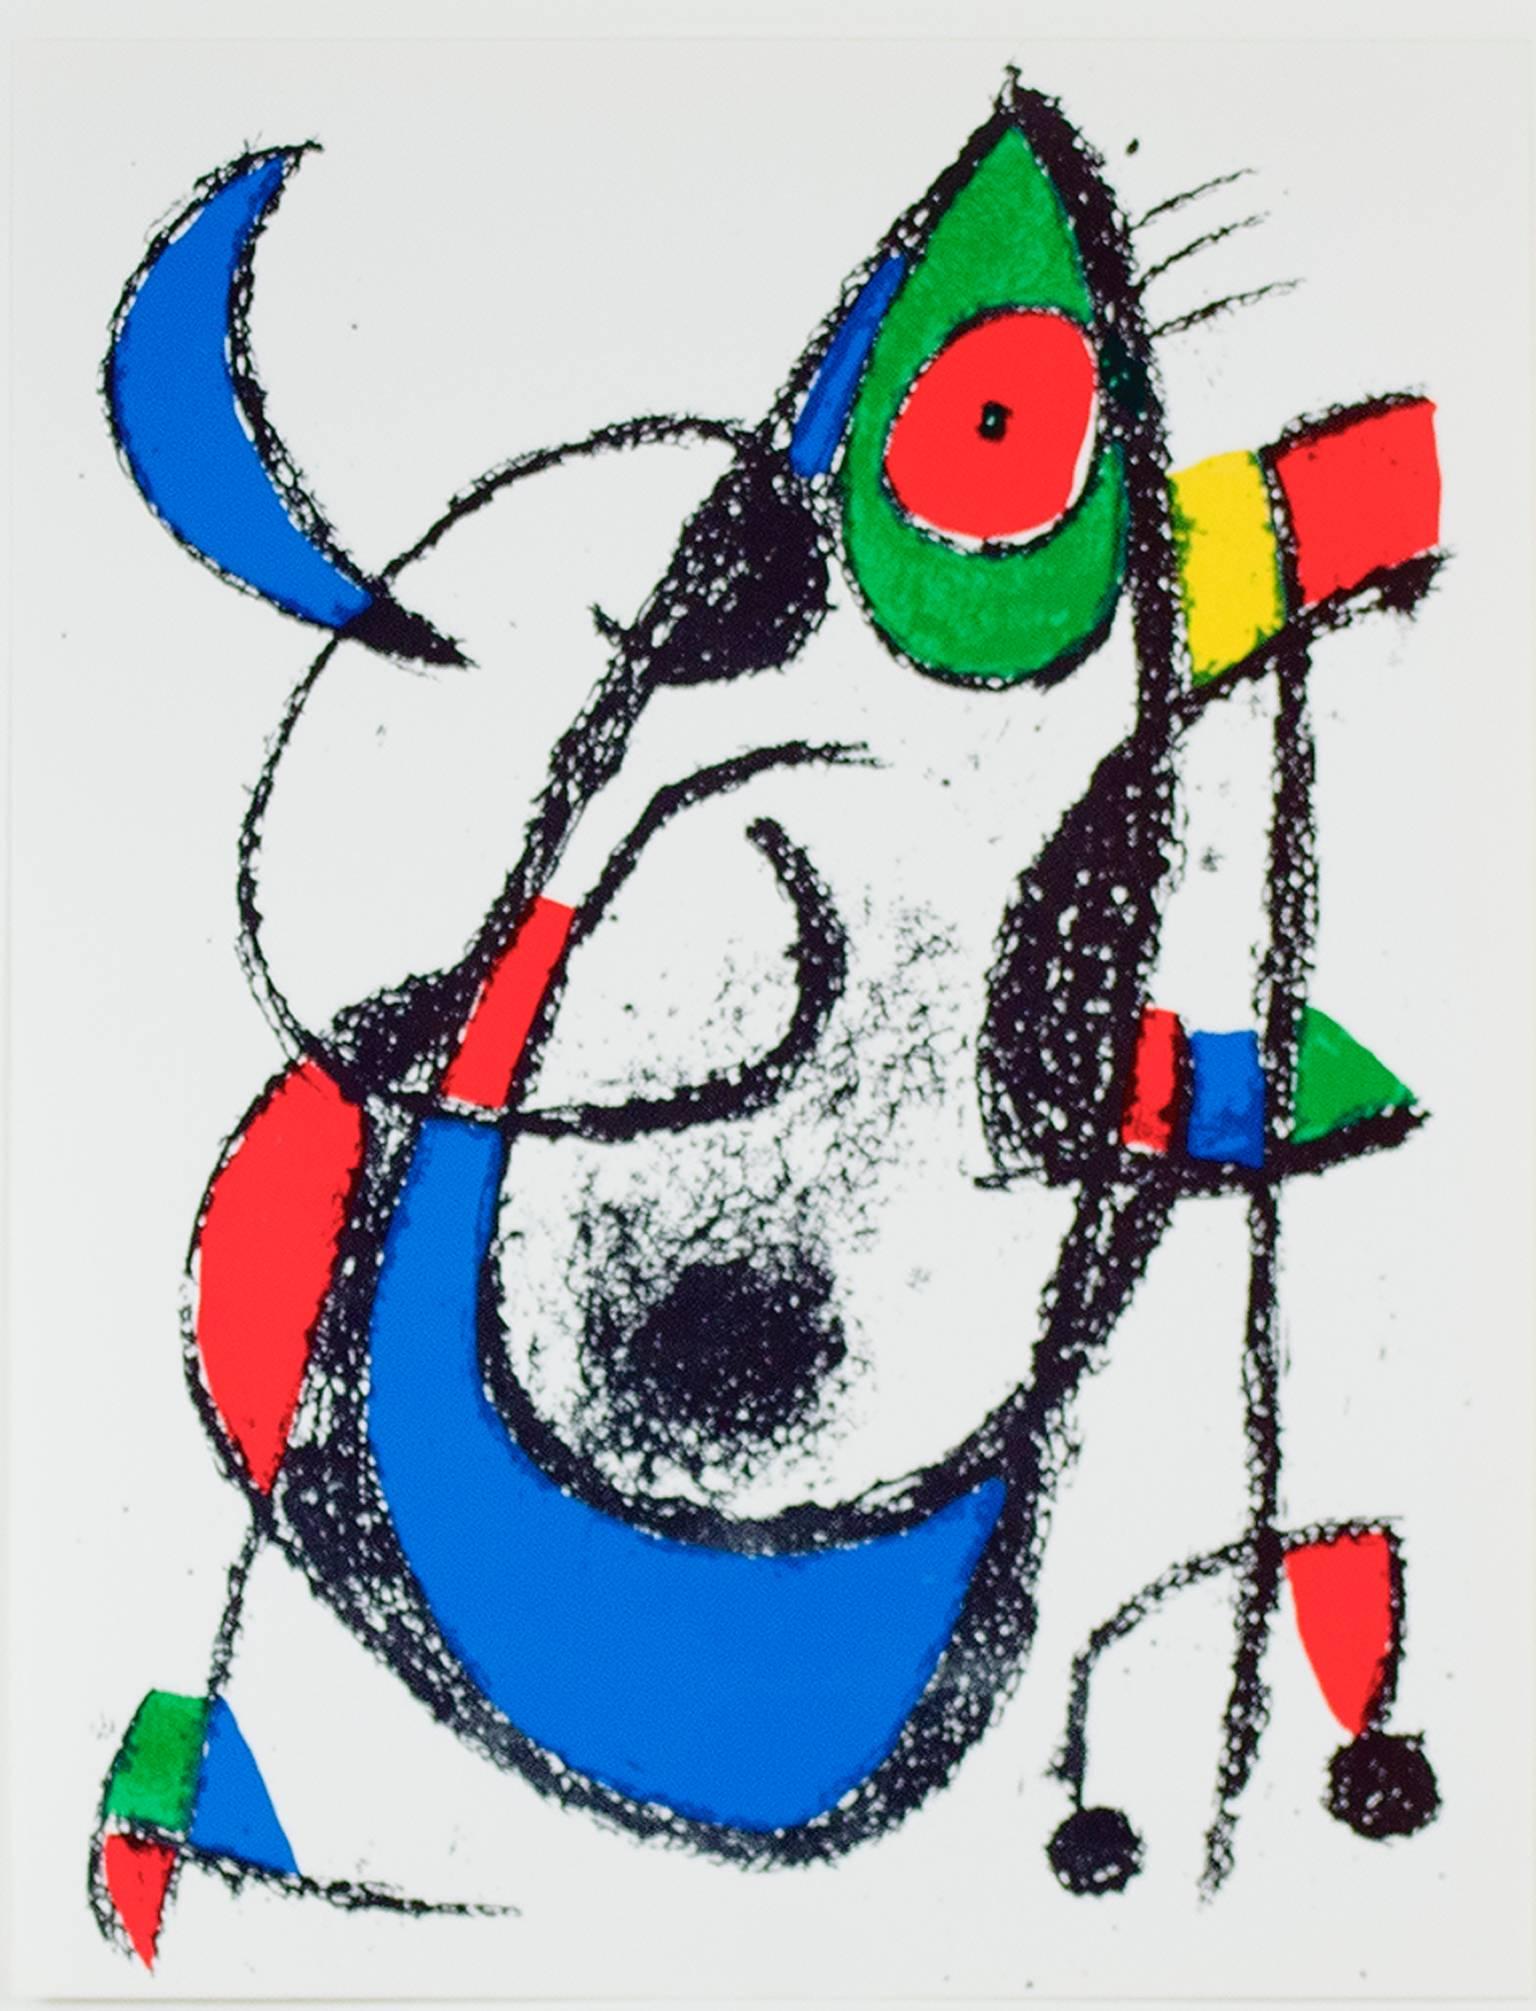 "Original Lithograph XI" from Miro Lithographs II, Maeght Publisher by Joan Miró